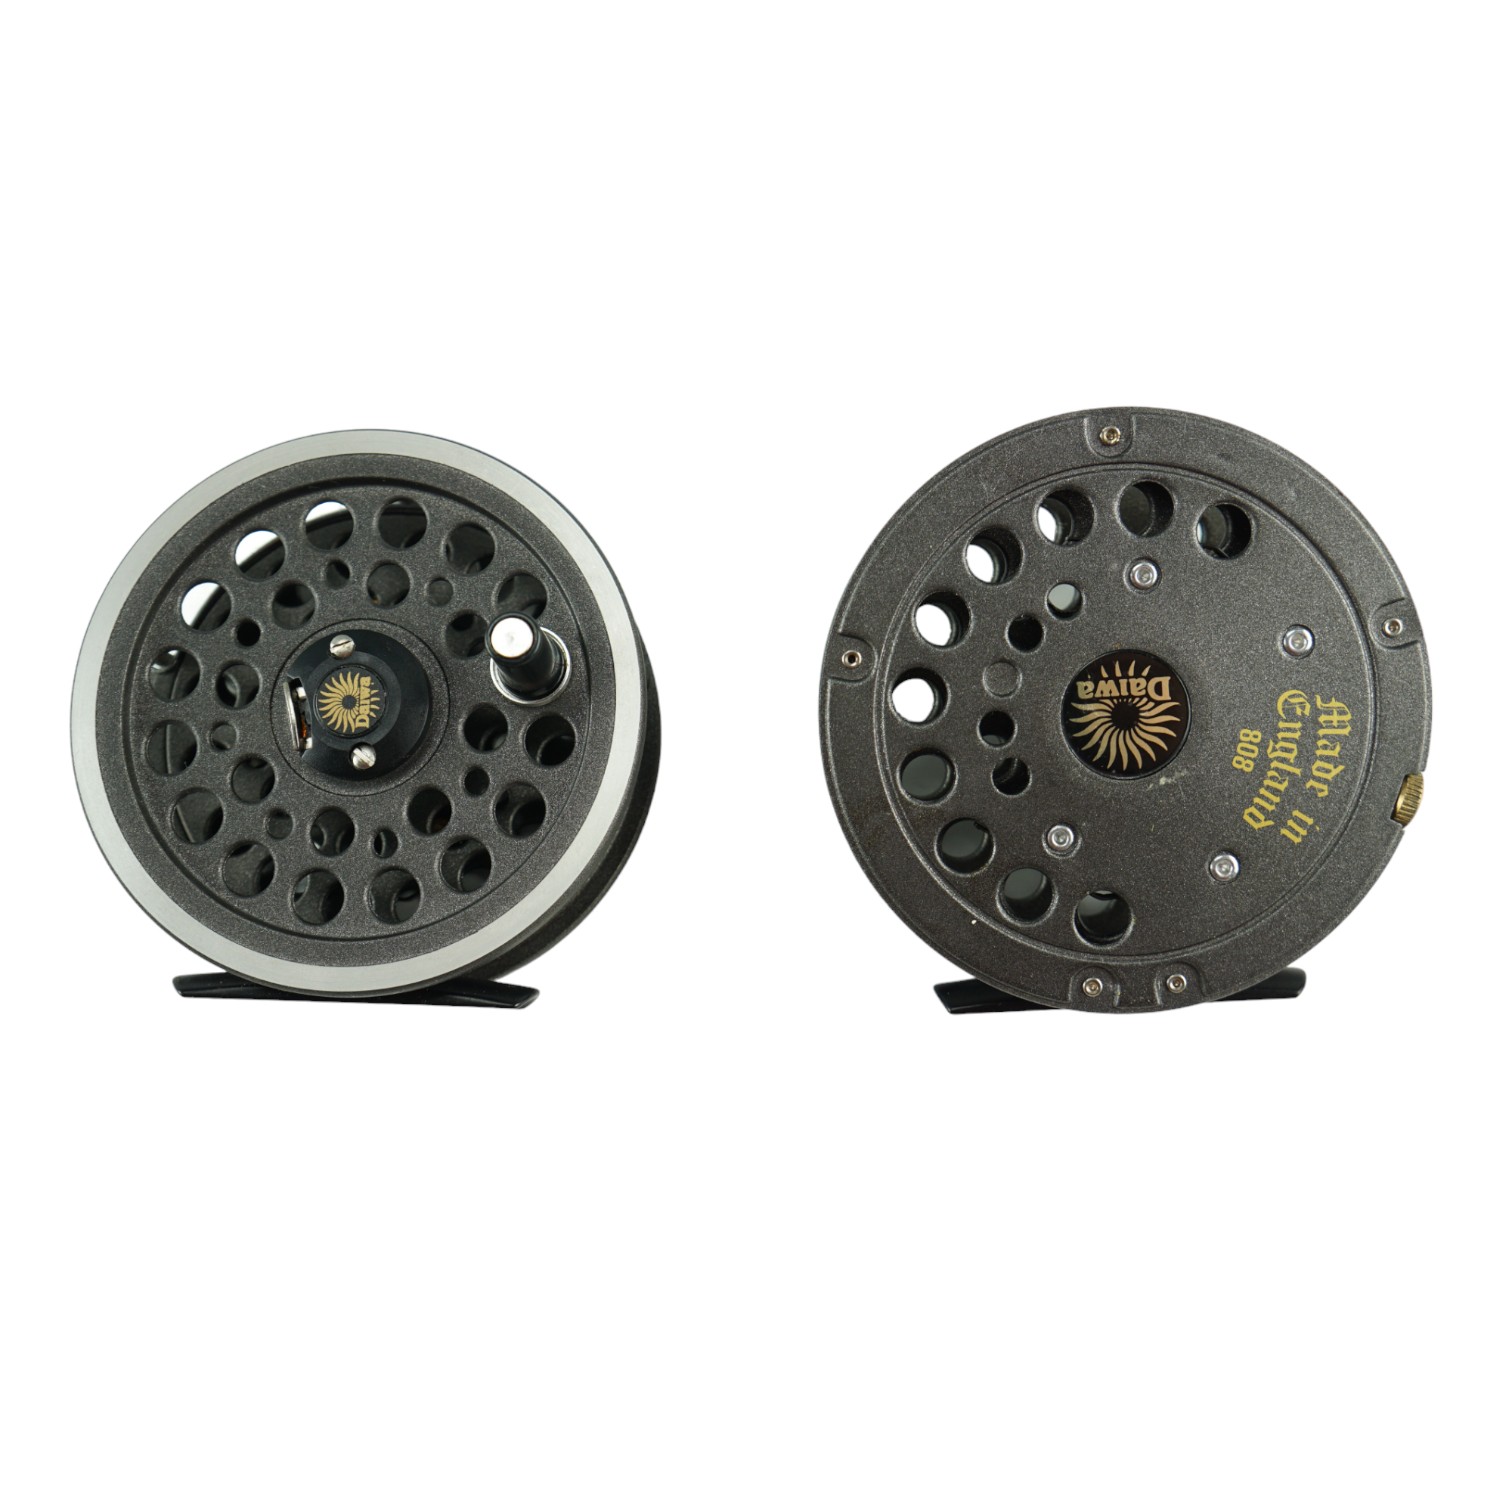 Two Daiwa 808 Osprey centre-pin fly fishing reels, apparently unused - Image 3 of 3